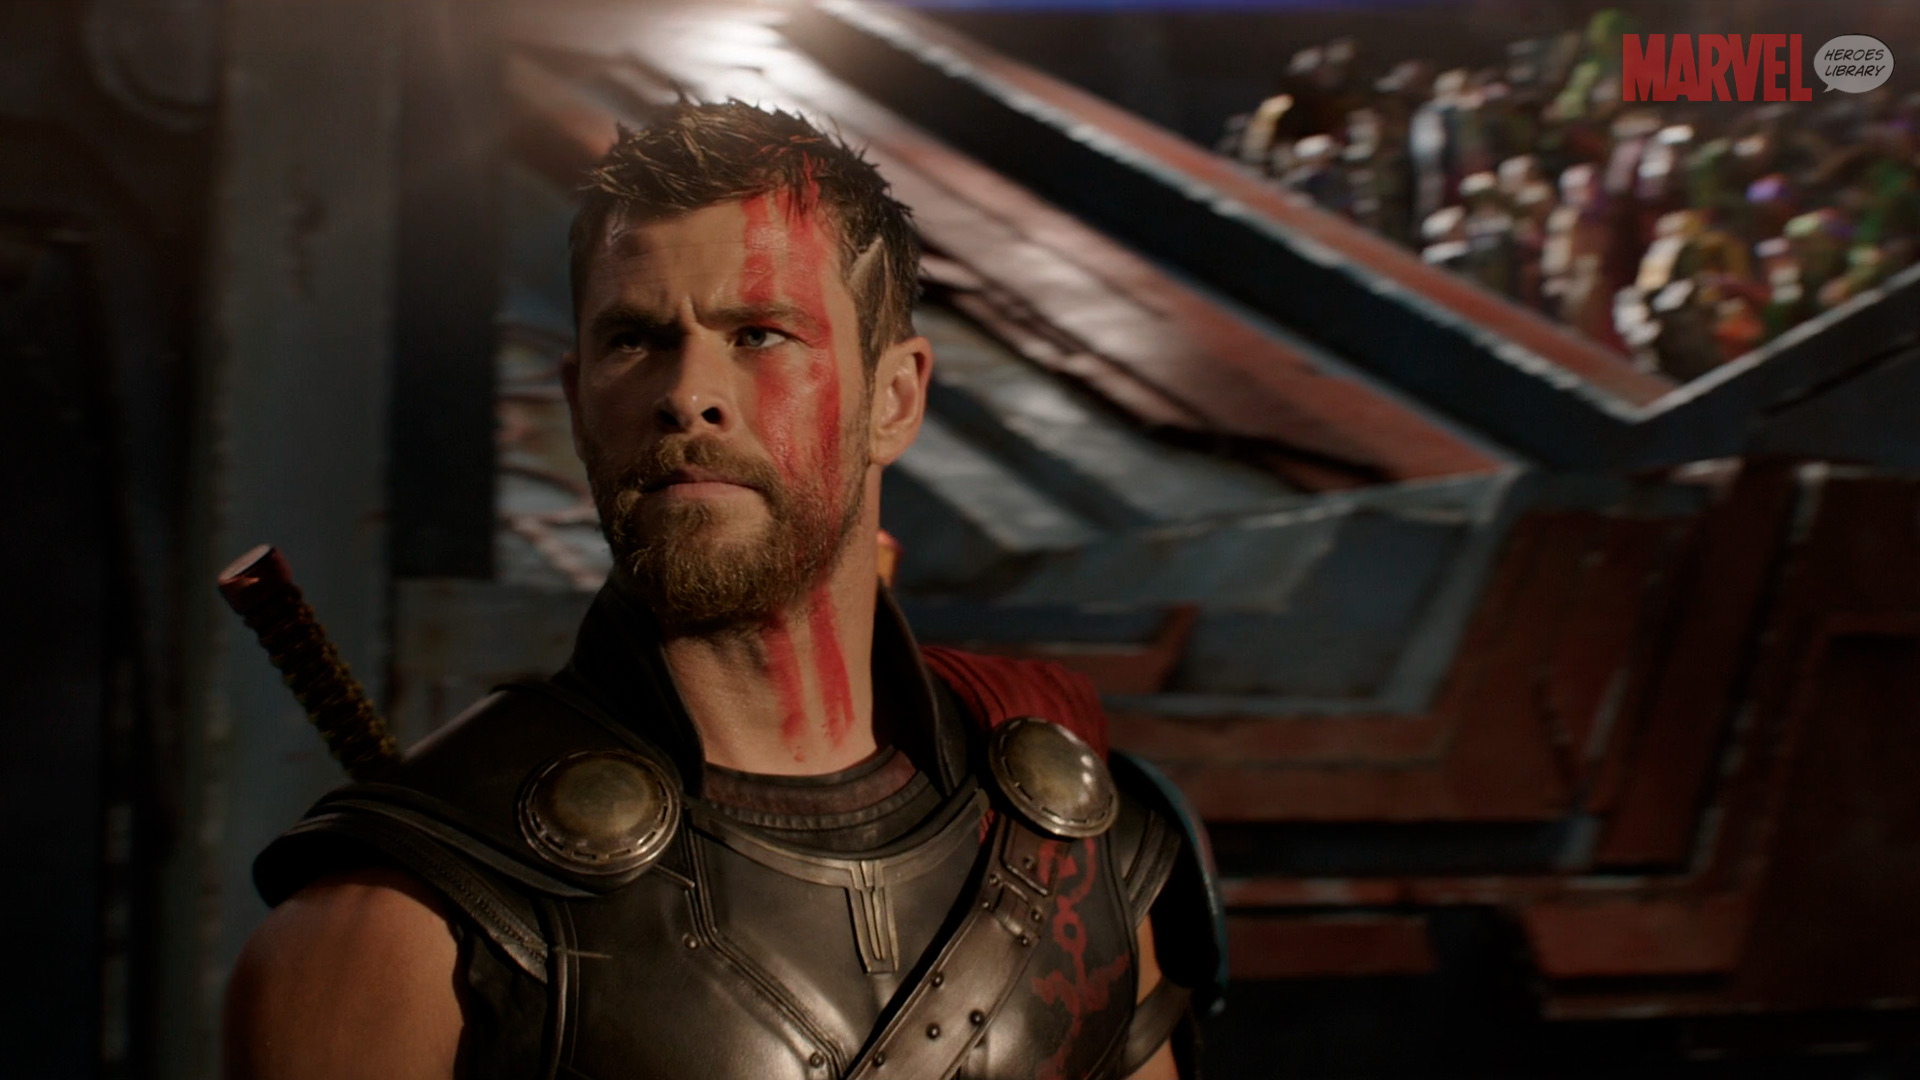 Thor In The Arena Hd Wallpaper - Thor Hd Wallpapers 1080p Of Marvel - HD Wallpaper 